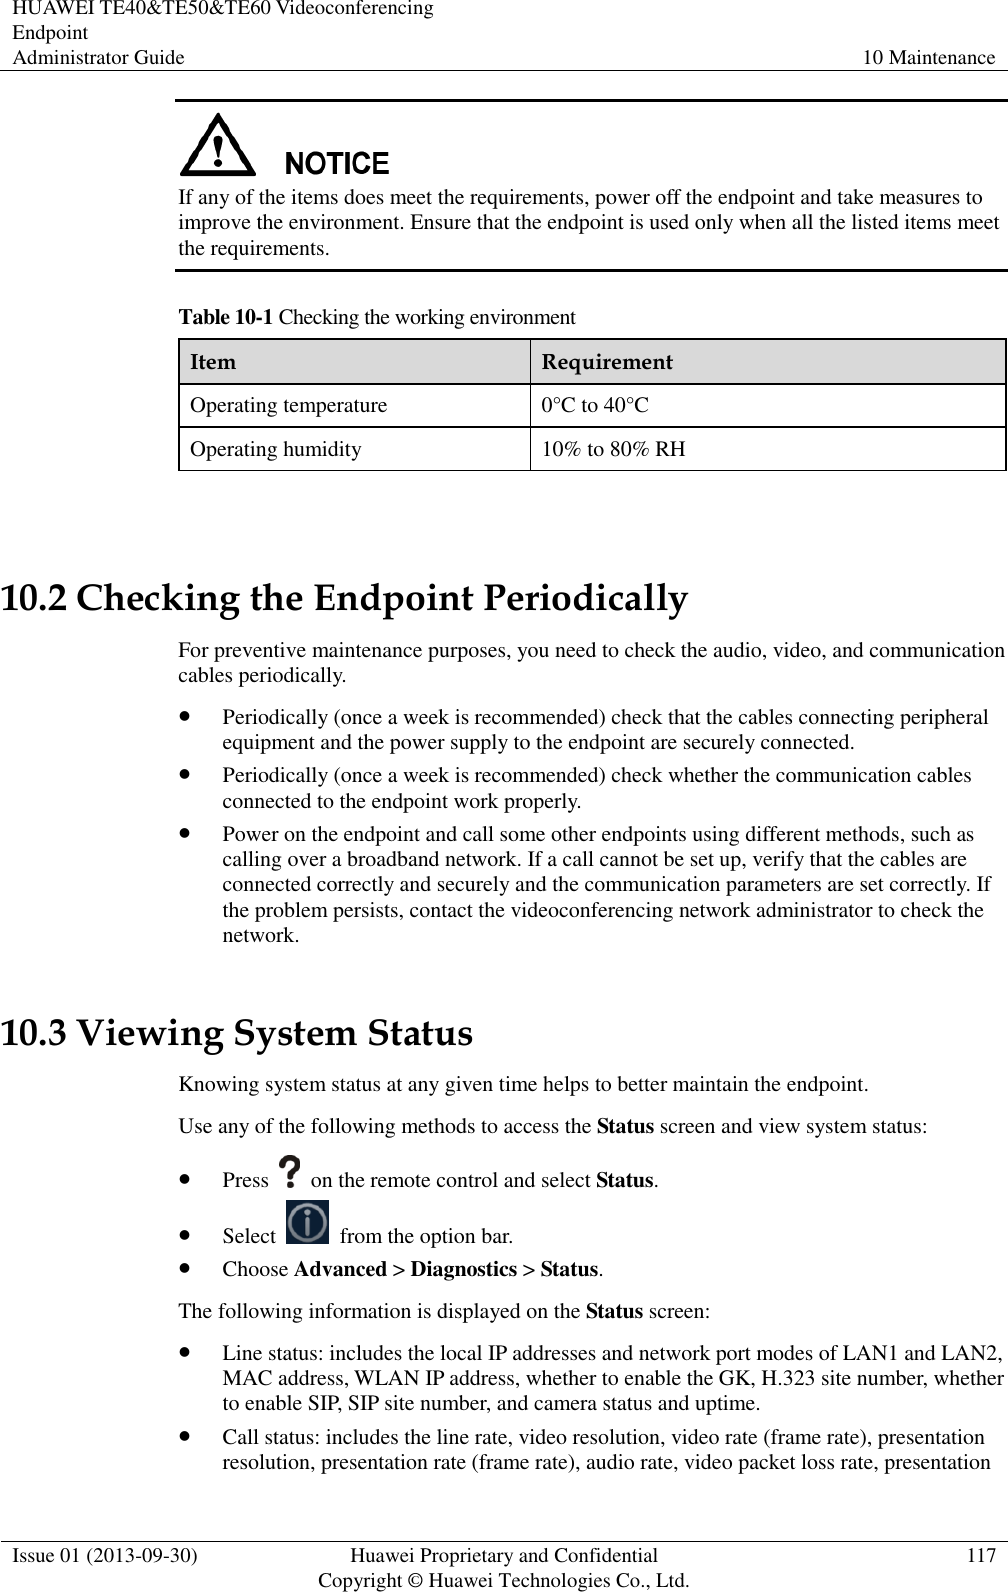 HUAWEI TE40&amp;TE50&amp;TE60 Videoconferencing Endpoint Administrator Guide 10 Maintenance  Issue 01 (2013-09-30) Huawei Proprietary and Confidential                                     Copyright © Huawei Technologies Co., Ltd. 117   If any of the items does meet the requirements, power off the endpoint and take measures to improve the environment. Ensure that the endpoint is used only when all the listed items meet the requirements. Table 10-1 Checking the working environment Item Requirement Operating temperature 0°C to 40°C Operating humidity 10% to 80% RH  10.2 Checking the Endpoint Periodically For preventive maintenance purposes, you need to check the audio, video, and communication cables periodically.  Periodically (once a week is recommended) check that the cables connecting peripheral equipment and the power supply to the endpoint are securely connected.  Periodically (once a week is recommended) check whether the communication cables connected to the endpoint work properly.    Power on the endpoint and call some other endpoints using different methods, such as calling over a broadband network. If a call cannot be set up, verify that the cables are connected correctly and securely and the communication parameters are set correctly. If the problem persists, contact the videoconferencing network administrator to check the network. 10.3 Viewing System Status Knowing system status at any given time helps to better maintain the endpoint. Use any of the following methods to access the Status screen and view system status:  Press    on the remote control and select Status.  Select    from the option bar.  Choose Advanced &gt; Diagnostics &gt; Status. The following information is displayed on the Status screen:  Line status: includes the local IP addresses and network port modes of LAN1 and LAN2, MAC address, WLAN IP address, whether to enable the GK, H.323 site number, whether to enable SIP, SIP site number, and camera status and uptime.  Call status: includes the line rate, video resolution, video rate (frame rate), presentation resolution, presentation rate (frame rate), audio rate, video packet loss rate, presentation 